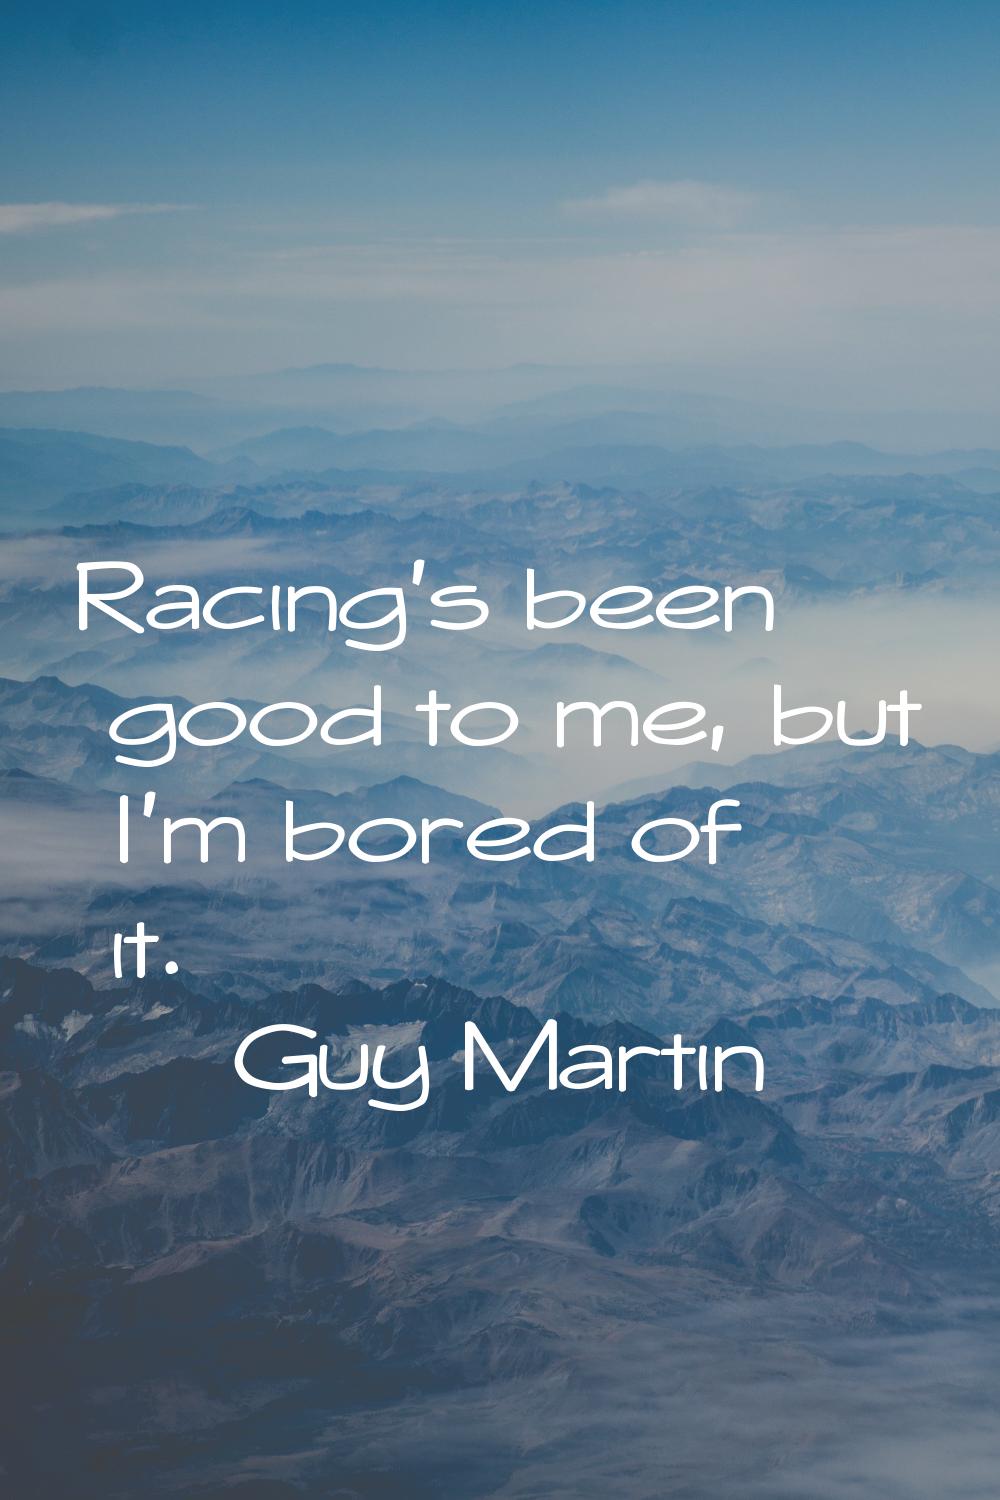 Racing's been good to me, but I'm bored of it.